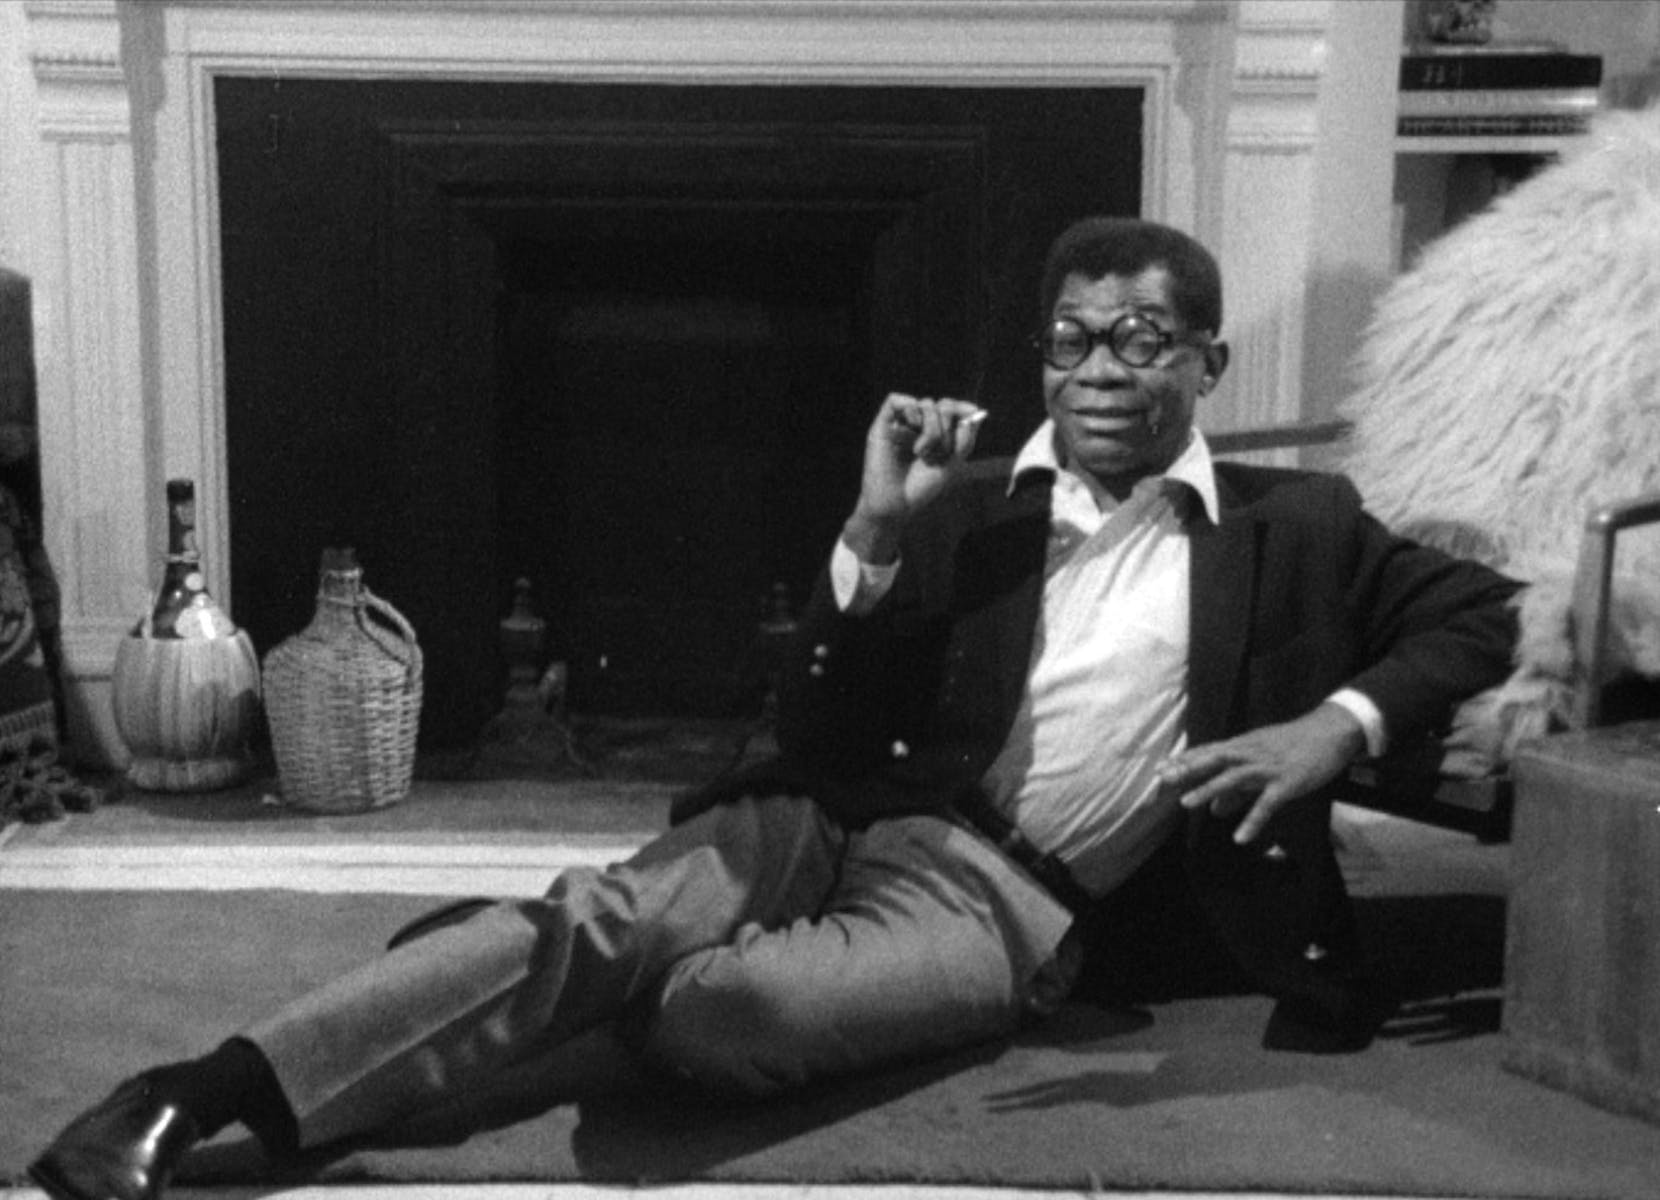 Image of man in suit lounging in front of fireplace